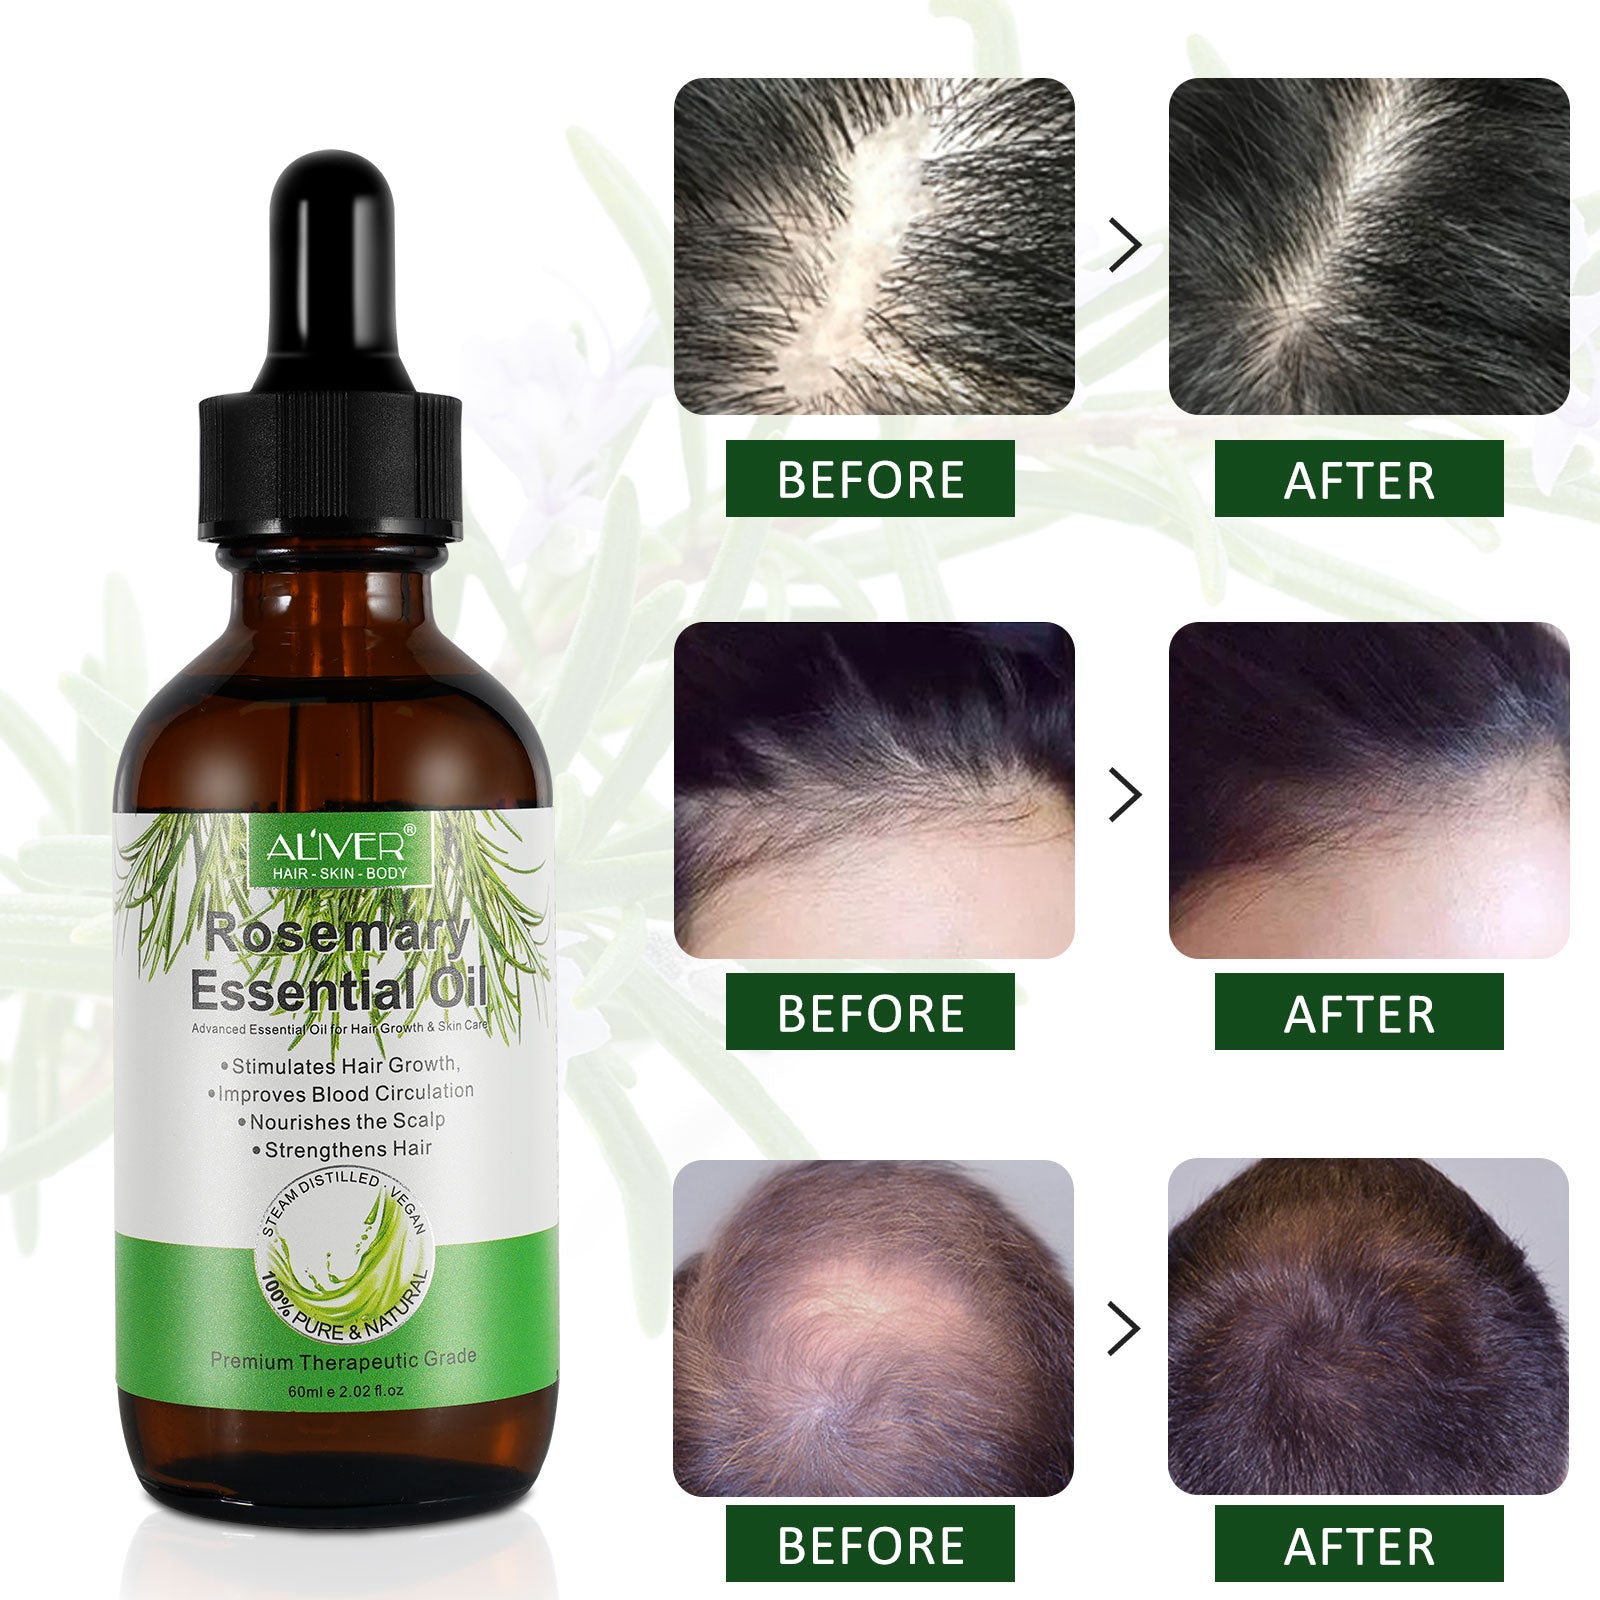 Aliver Rosemary Oil for Hair Growth – Aliver Beauty|Aliver.com